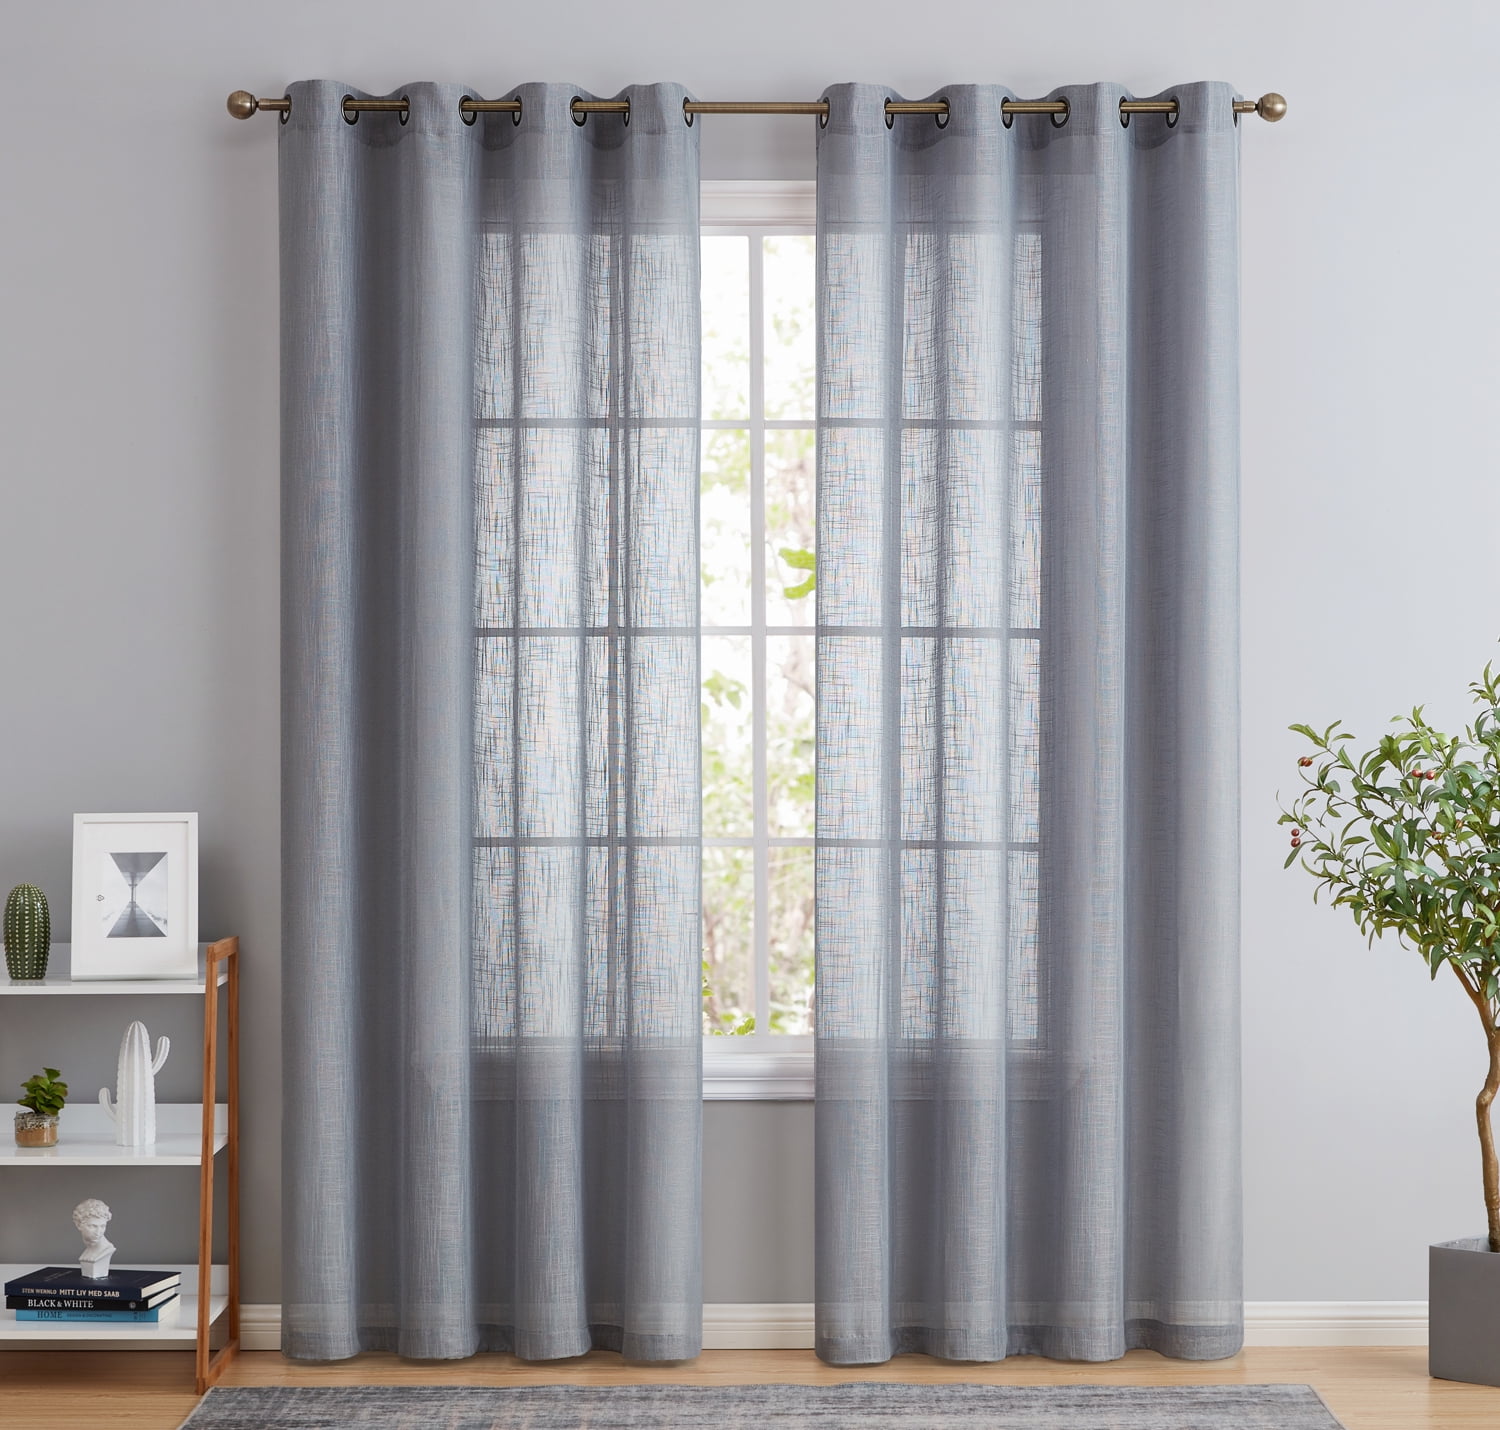 Green Sheer White Curtains for Living Room 72 Length Grey Tree Branches Print Curtain Set Linen Textured Semi-Sheer Window Drapes for Bedroom Grommet Top 2 Panels